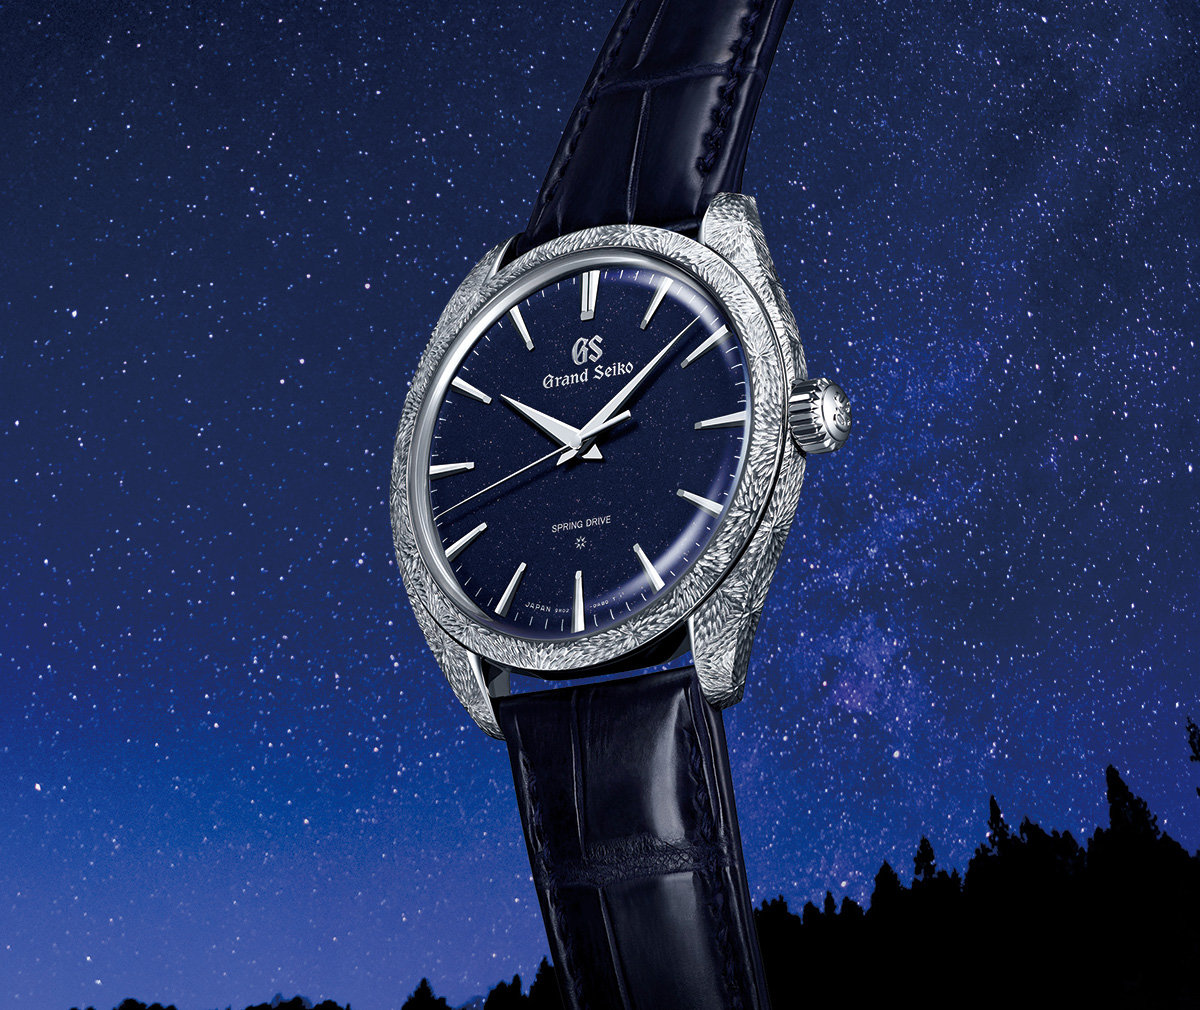 New: Grand Seiko adds yet another masterpiece to their 140th Anniversary  Limited Edition - the SBGZ007 -